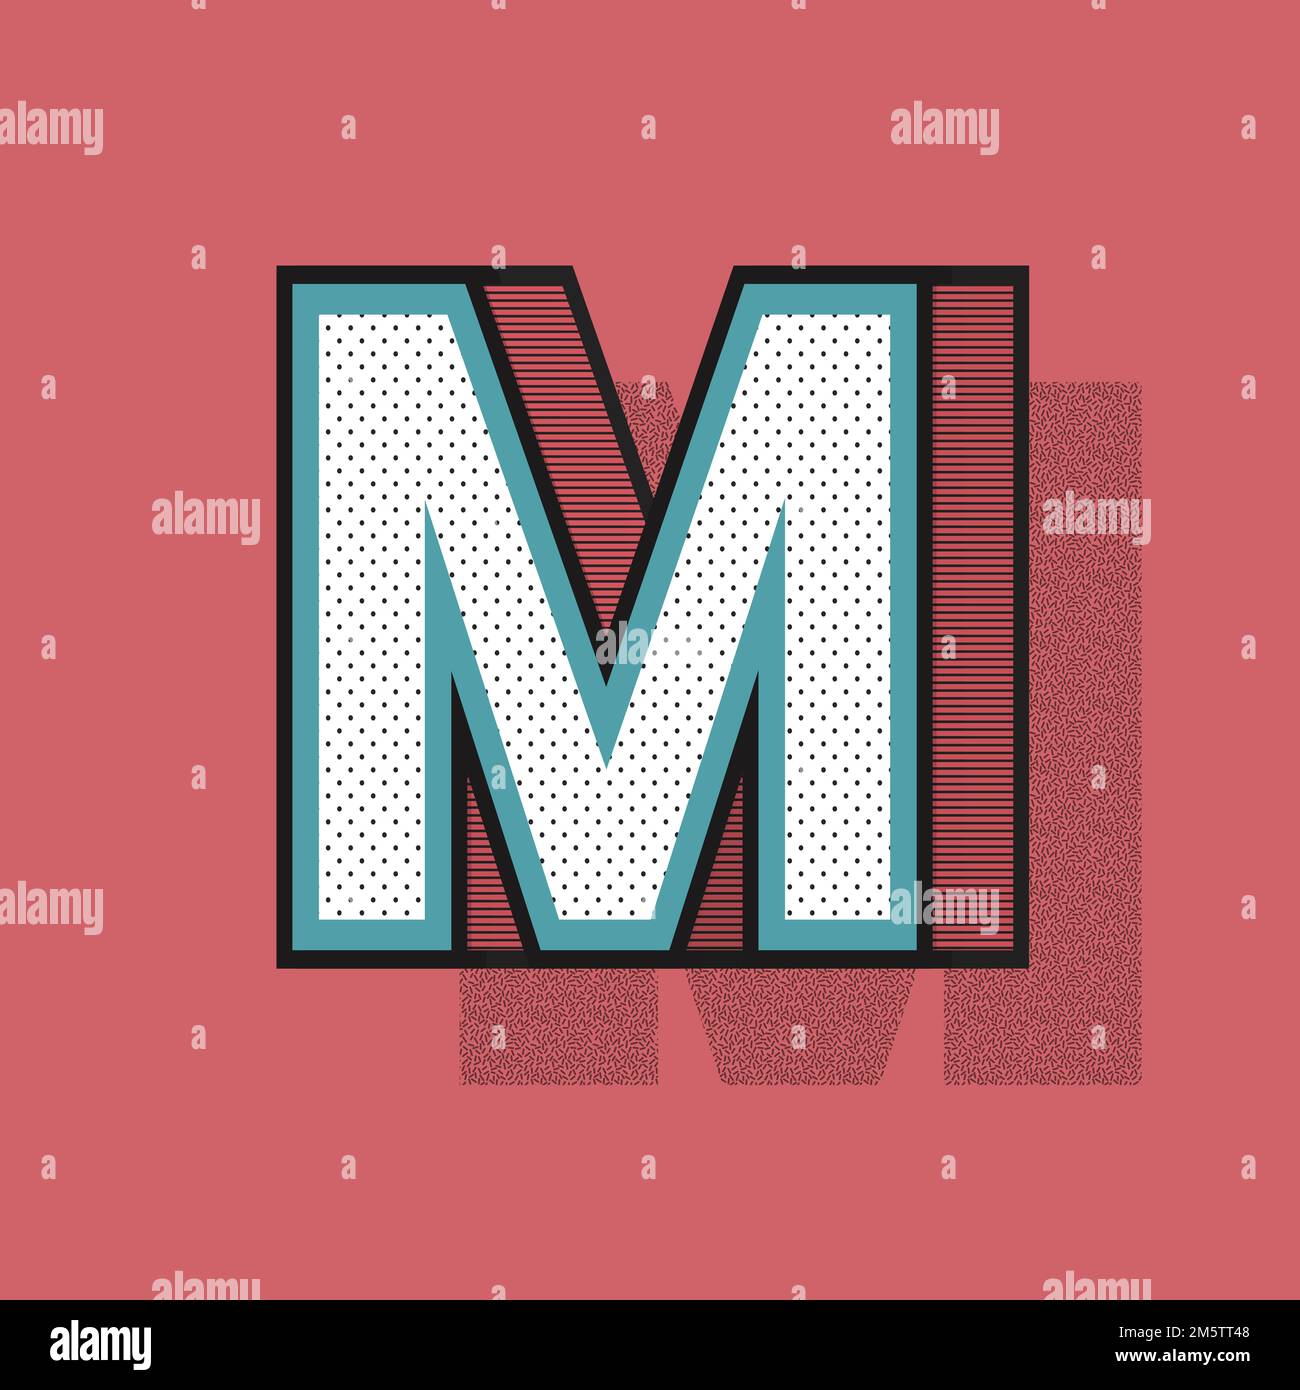 The Letter M 3d Diamond Art Illustration Stock Photo, Picture and Royalty  Free Image. Image 14413431.